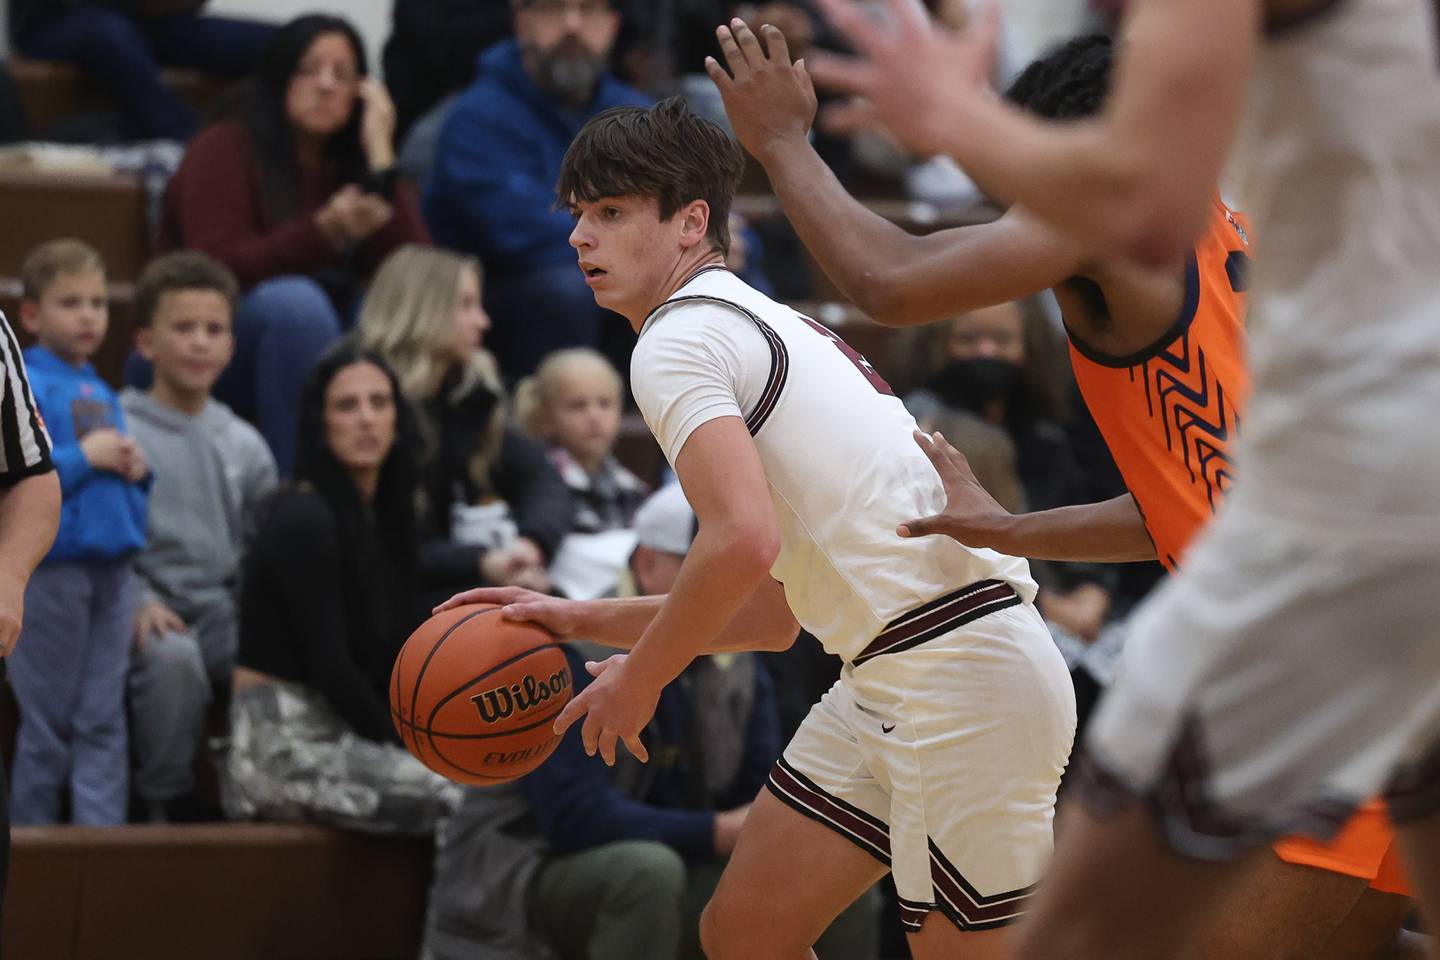 Lockport’s Drew Gallagher looks for a play against Romeoville in the 2023 WJOL Thanksgiving Tournament on Monday, Nov. 20, 2023, in Joliet.